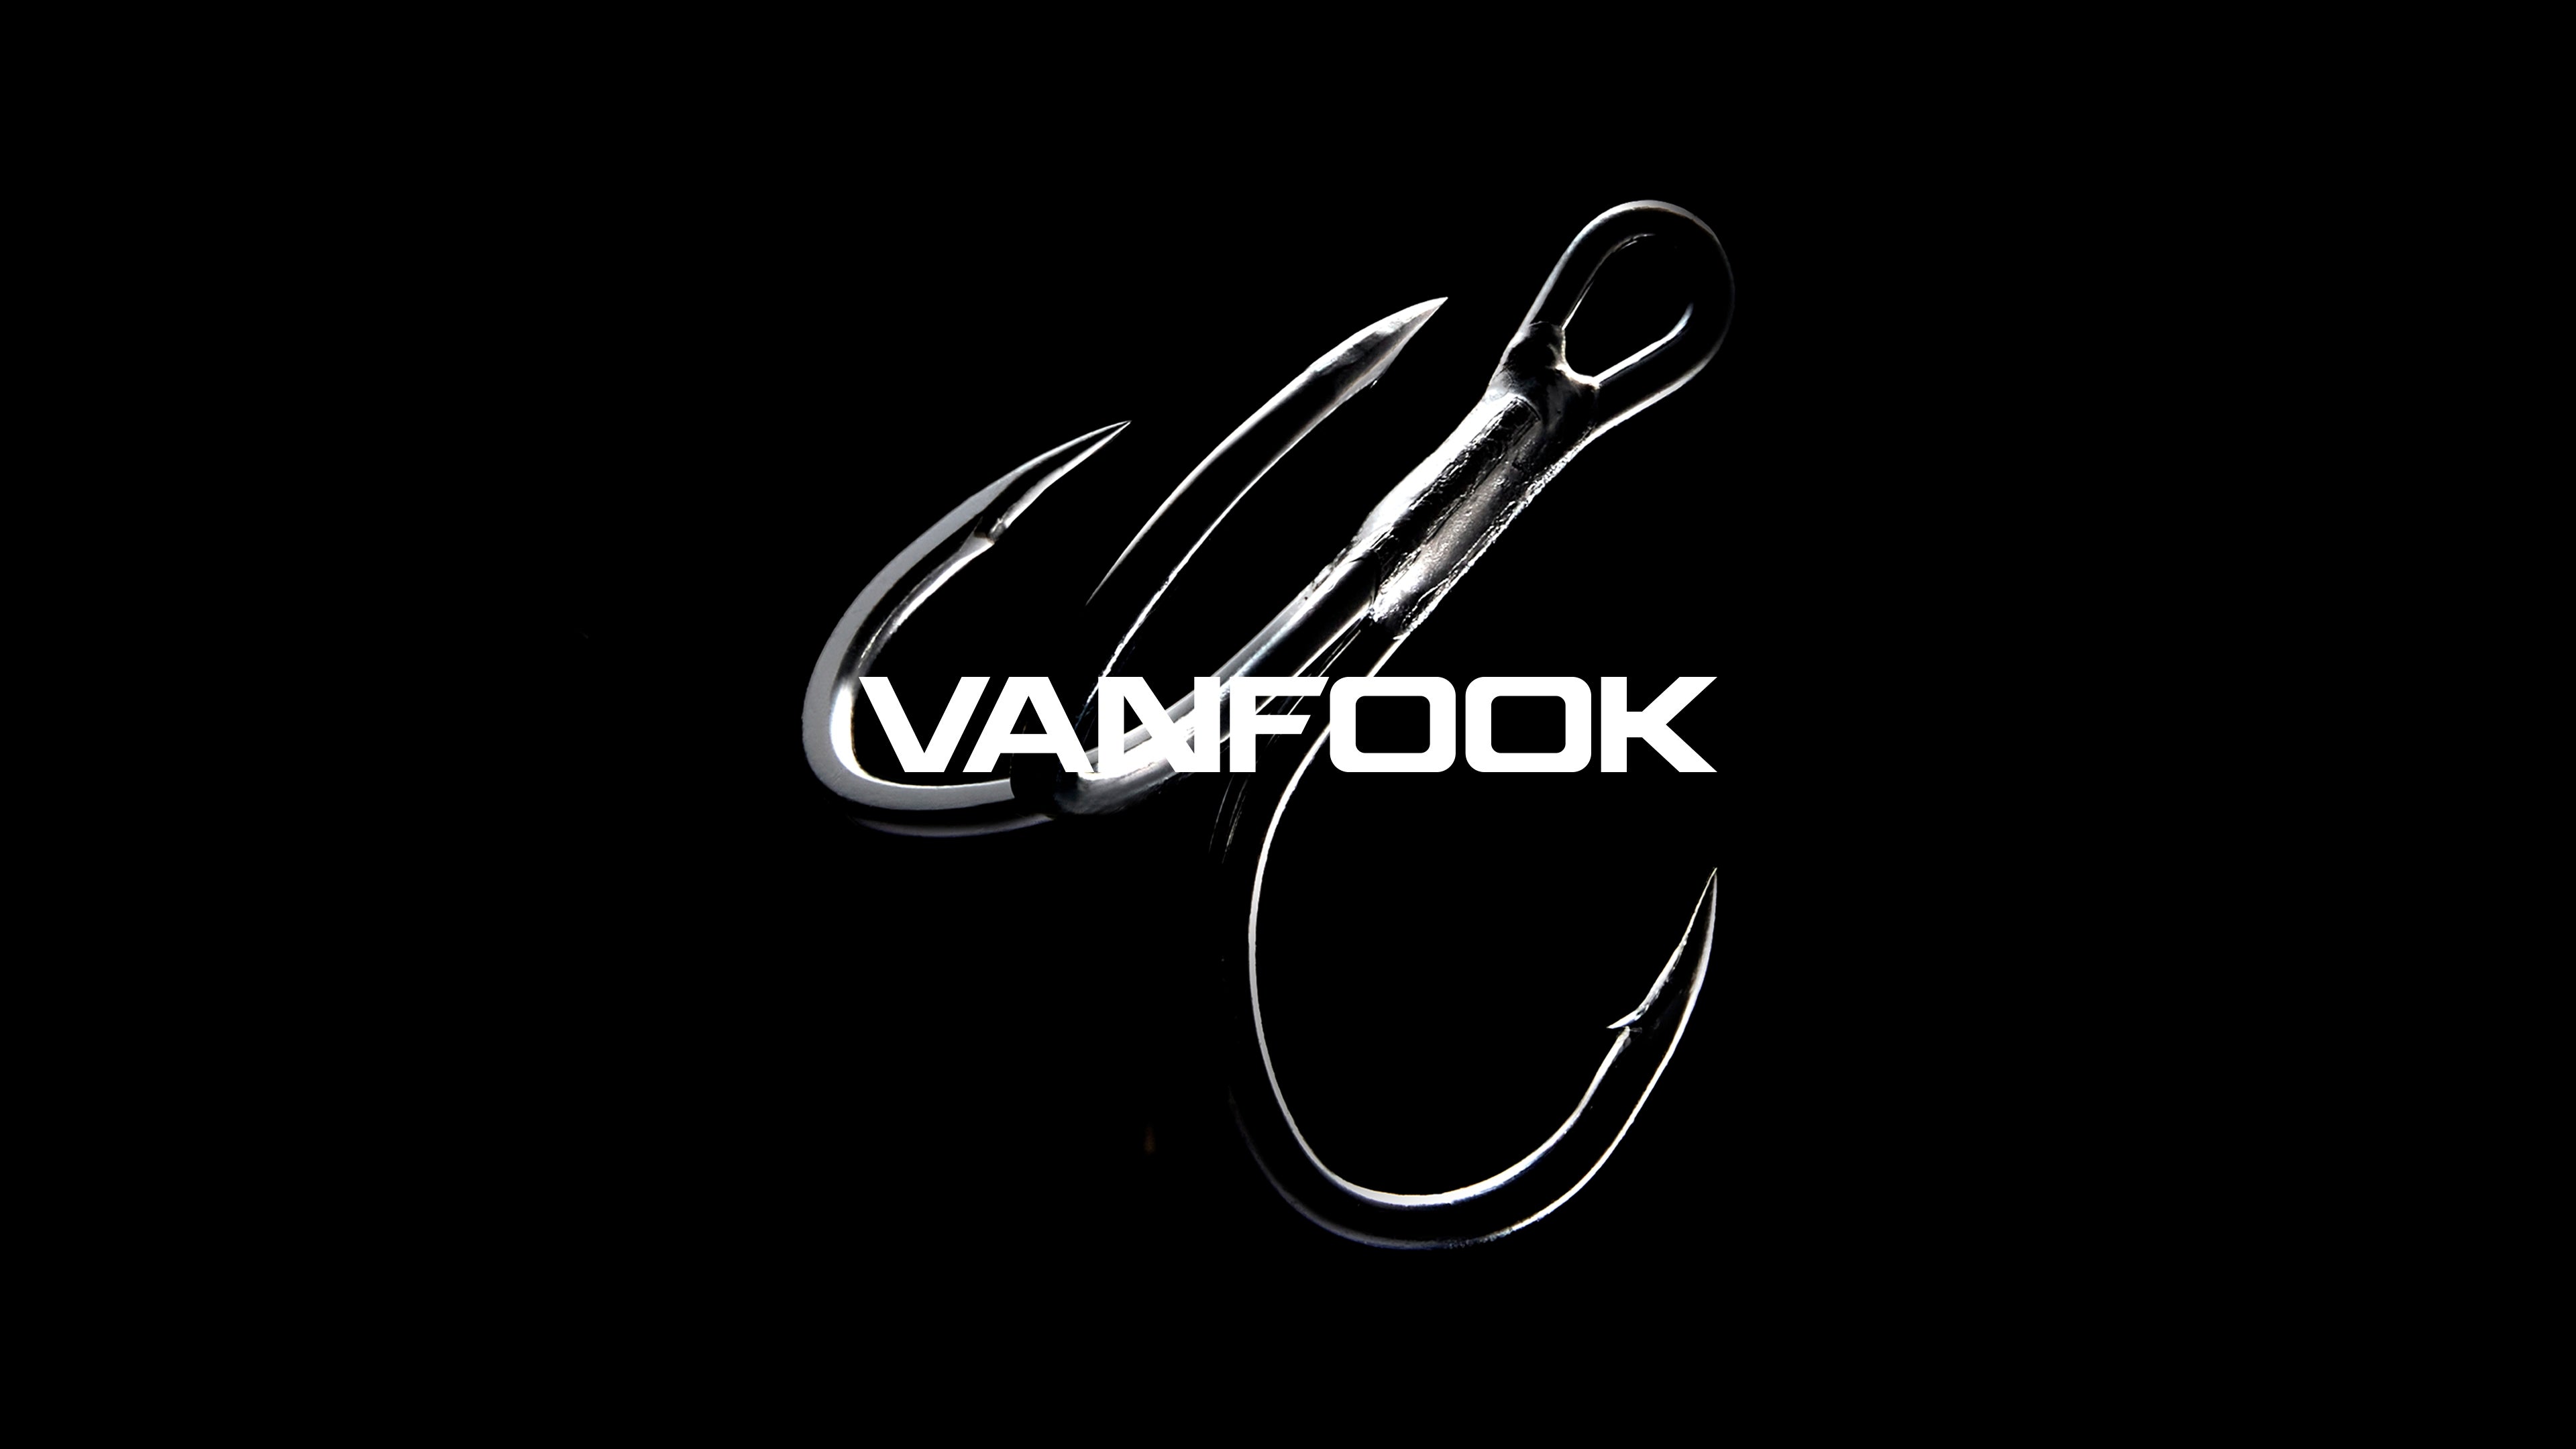 VANFOOK: Where Passion and Technology Merge into Hooks Perfection